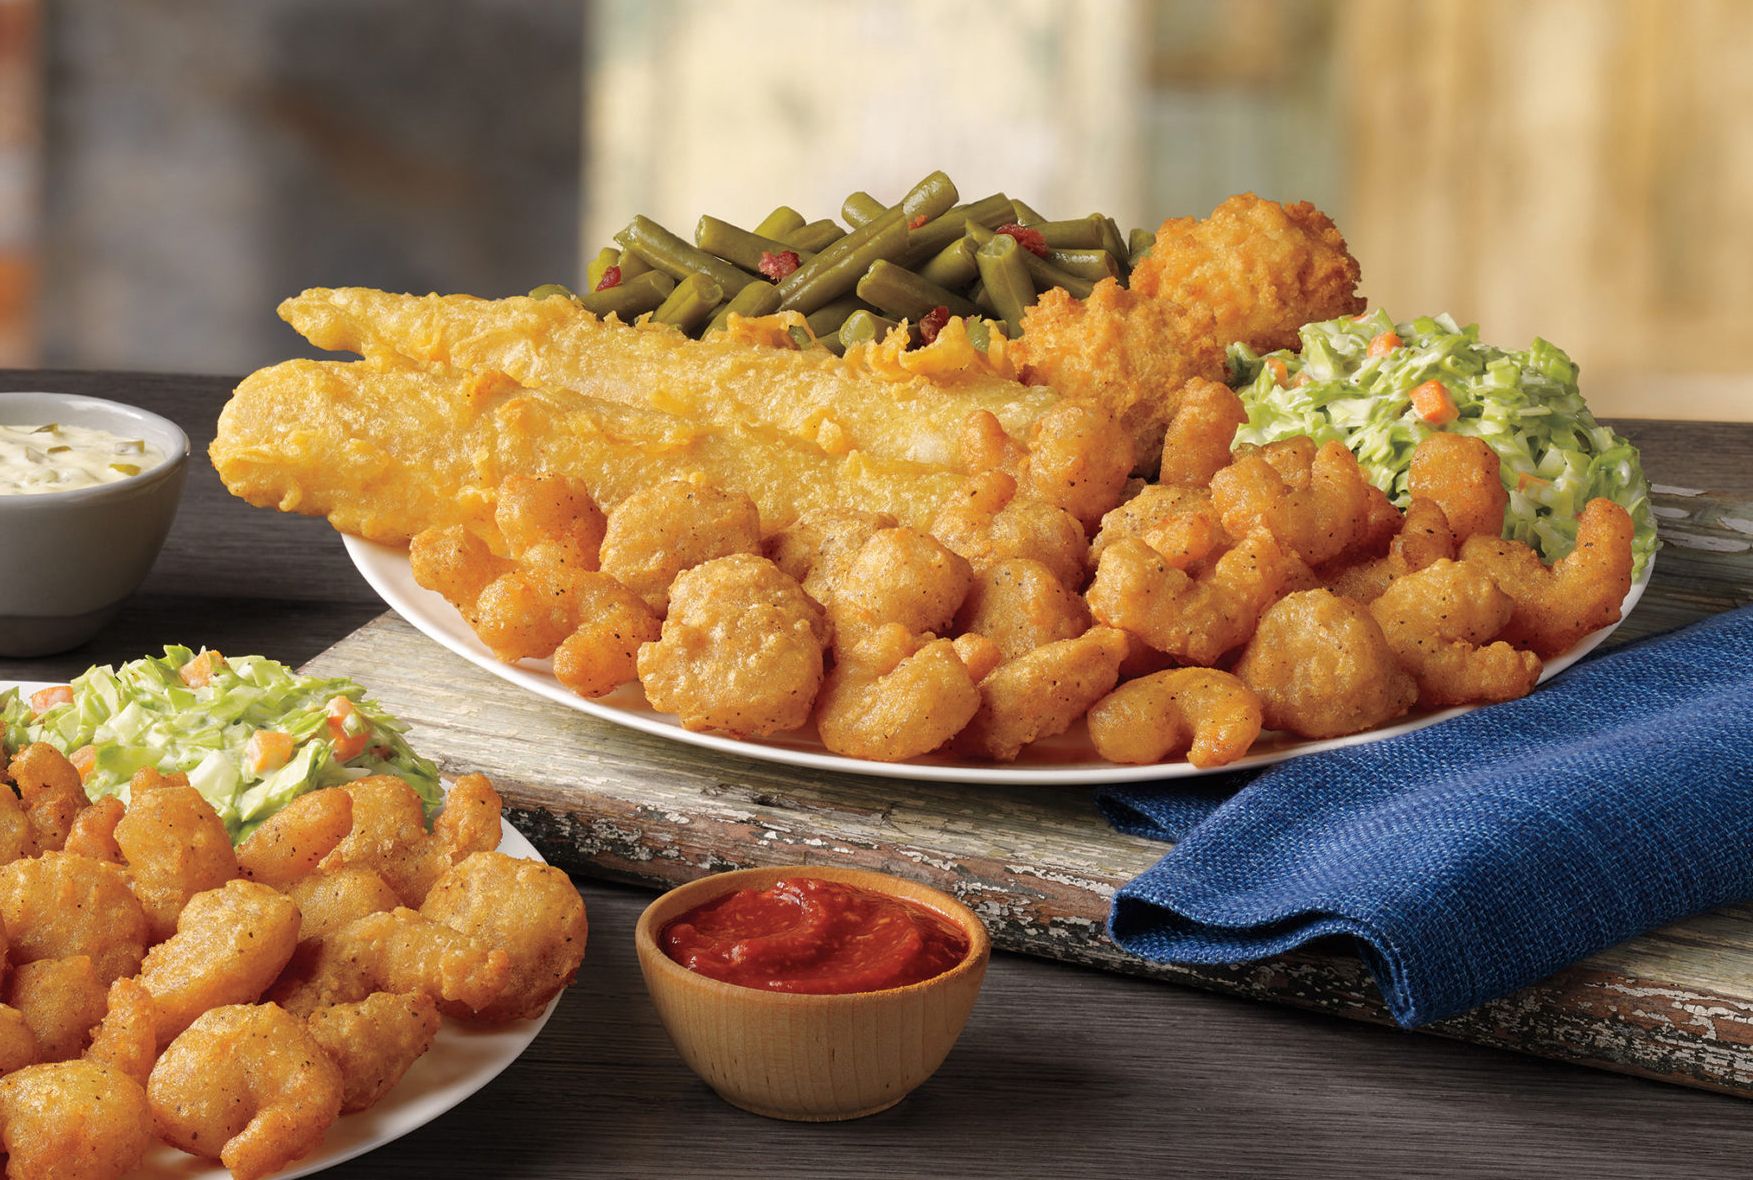 New Shrimp & Seafood Meals Land at Captain D's for a Limited Time 